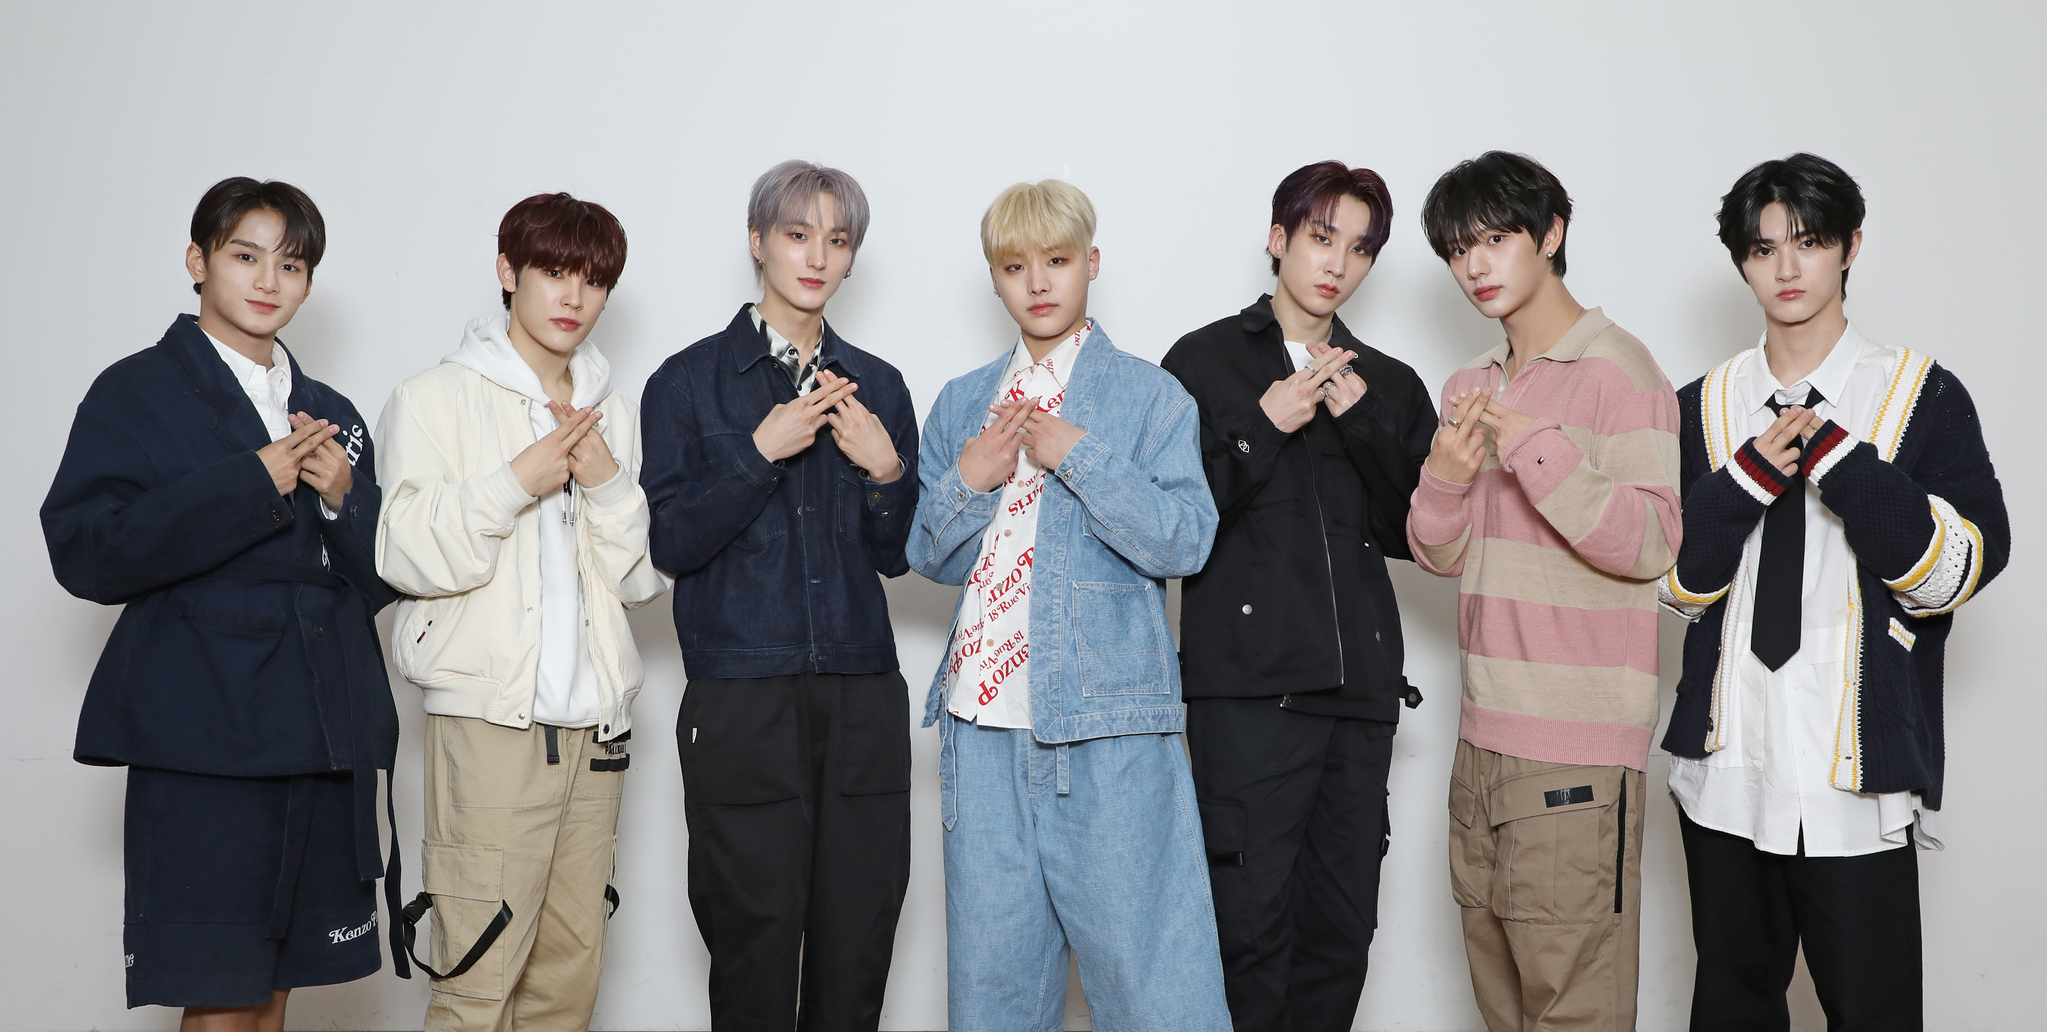 Members of boy band Xodiac pose for photos during an interview with the Korea JoongAng Daily on March 12 in western Seoul. [PARK SANG-MOON]